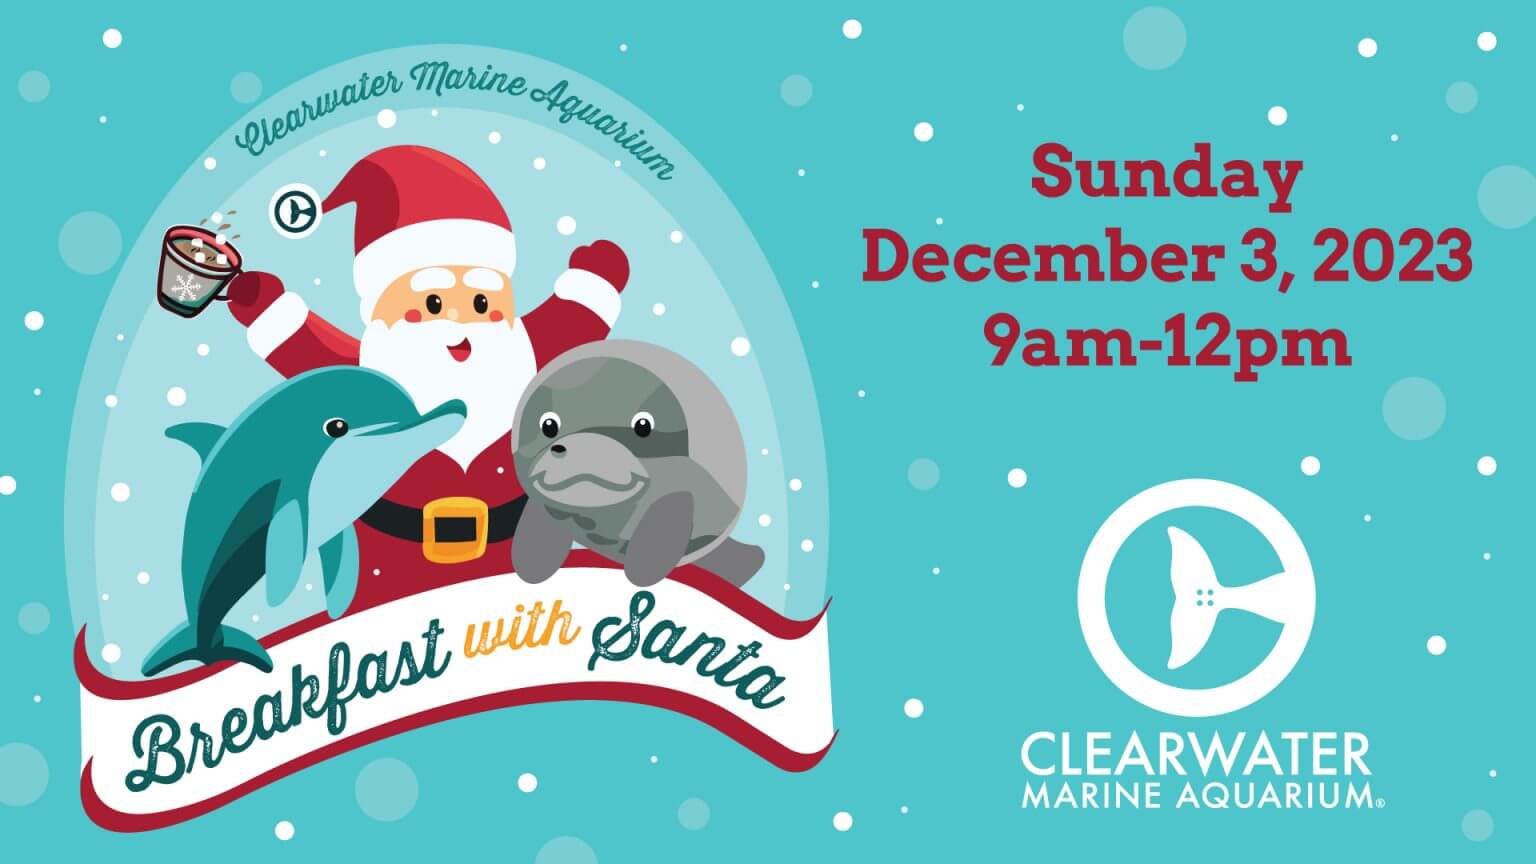 Clearwater Breakfast with Santa promotional flyer. 